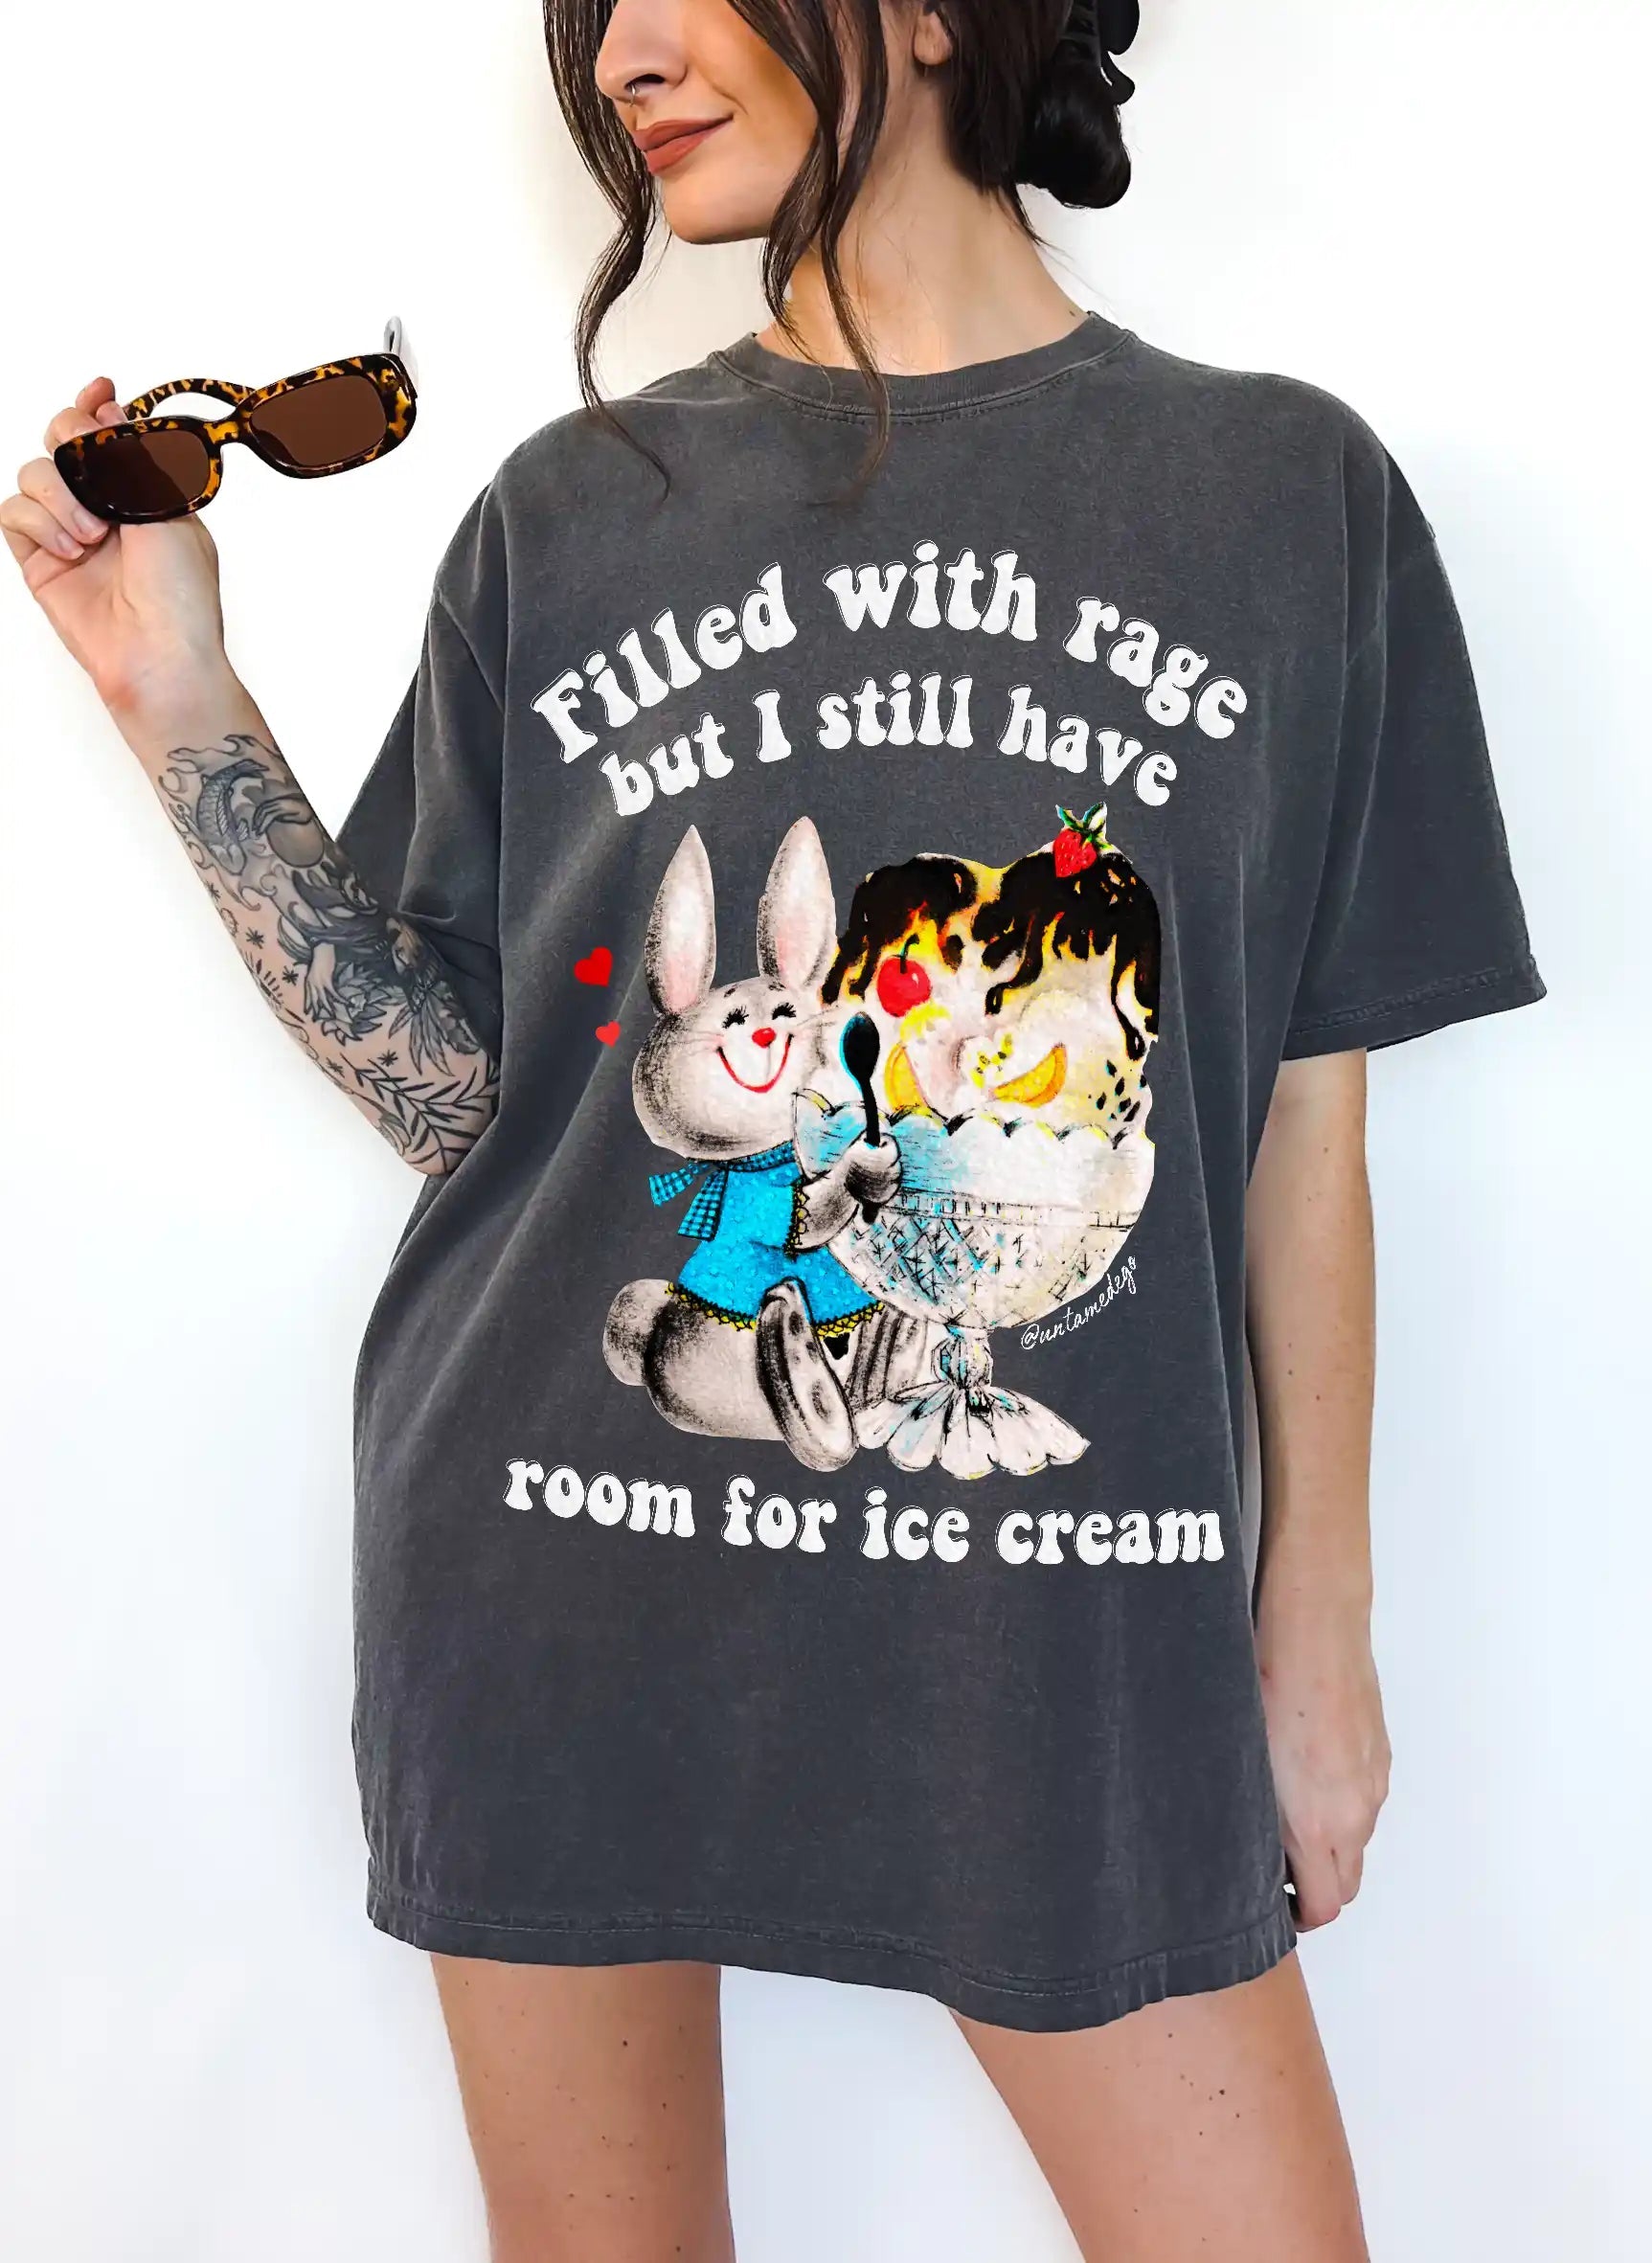 Filled With Rage But I Still Have Room For Ice Cream Tee - UntamedEgo LLC.